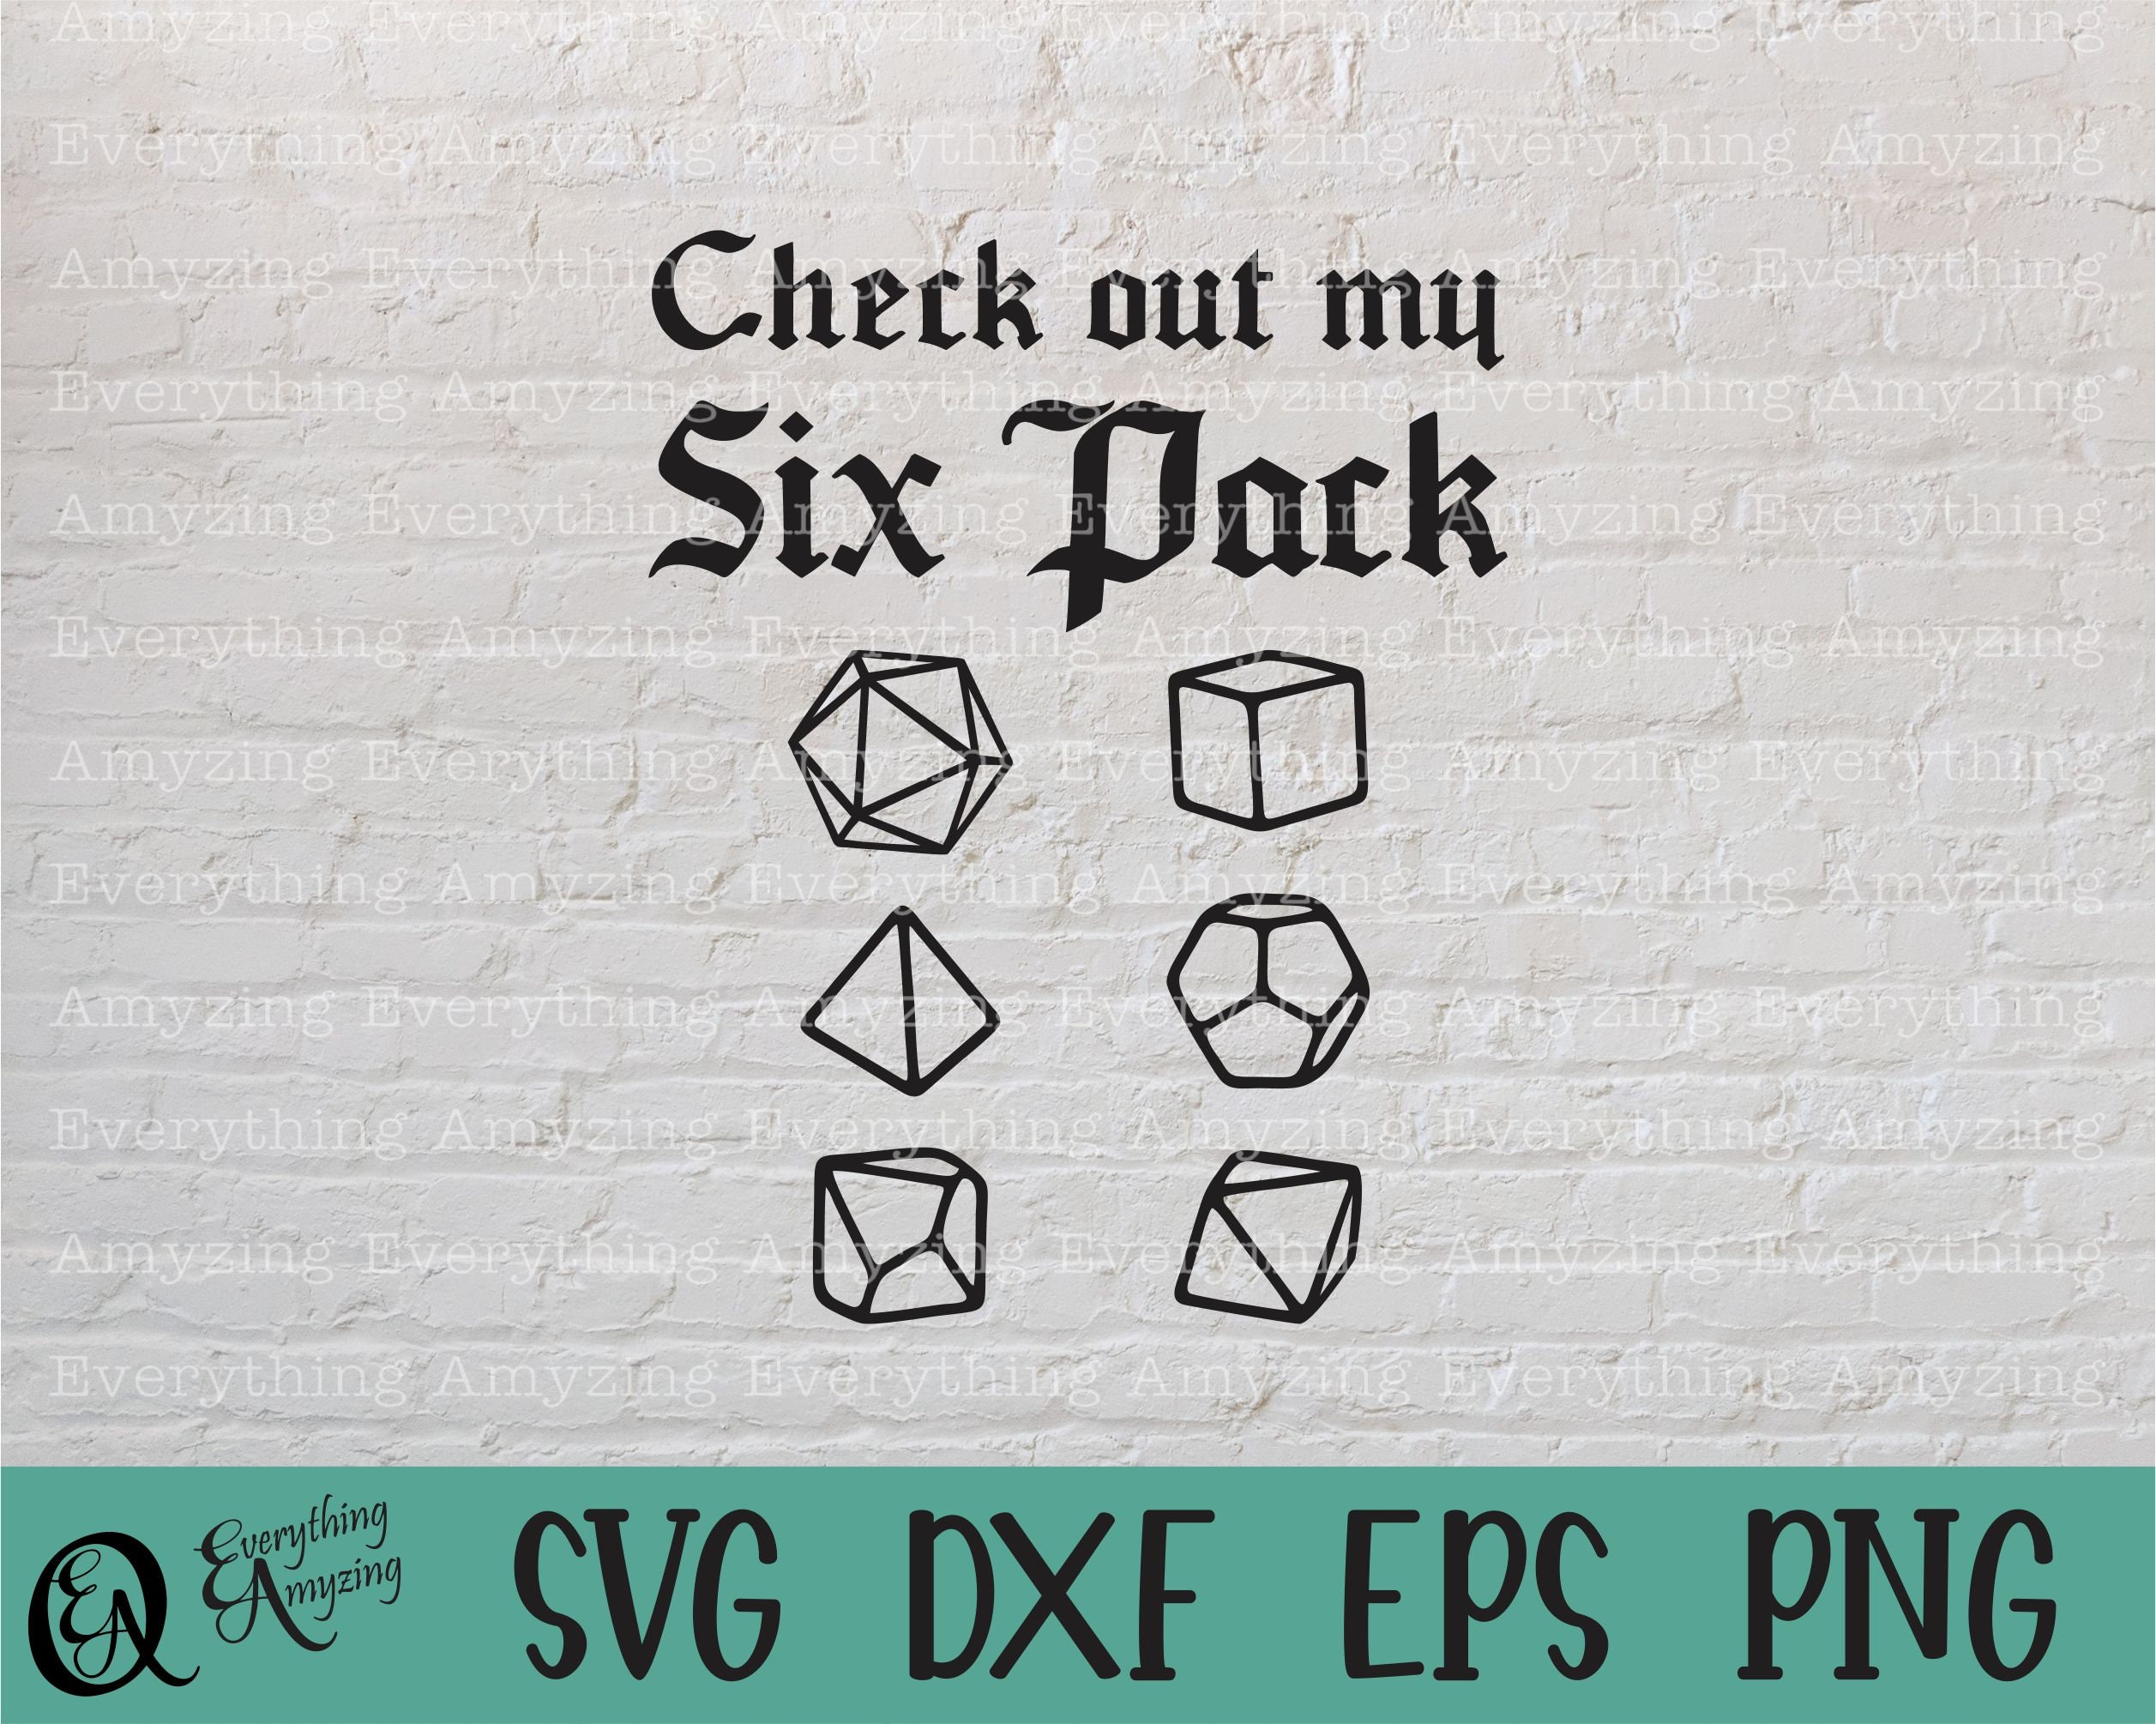 Six Pack Svg - Cut files for Cricut - Silhouette - Vector - Instant Digital  Download - svg, png, jpg, and psd files included!